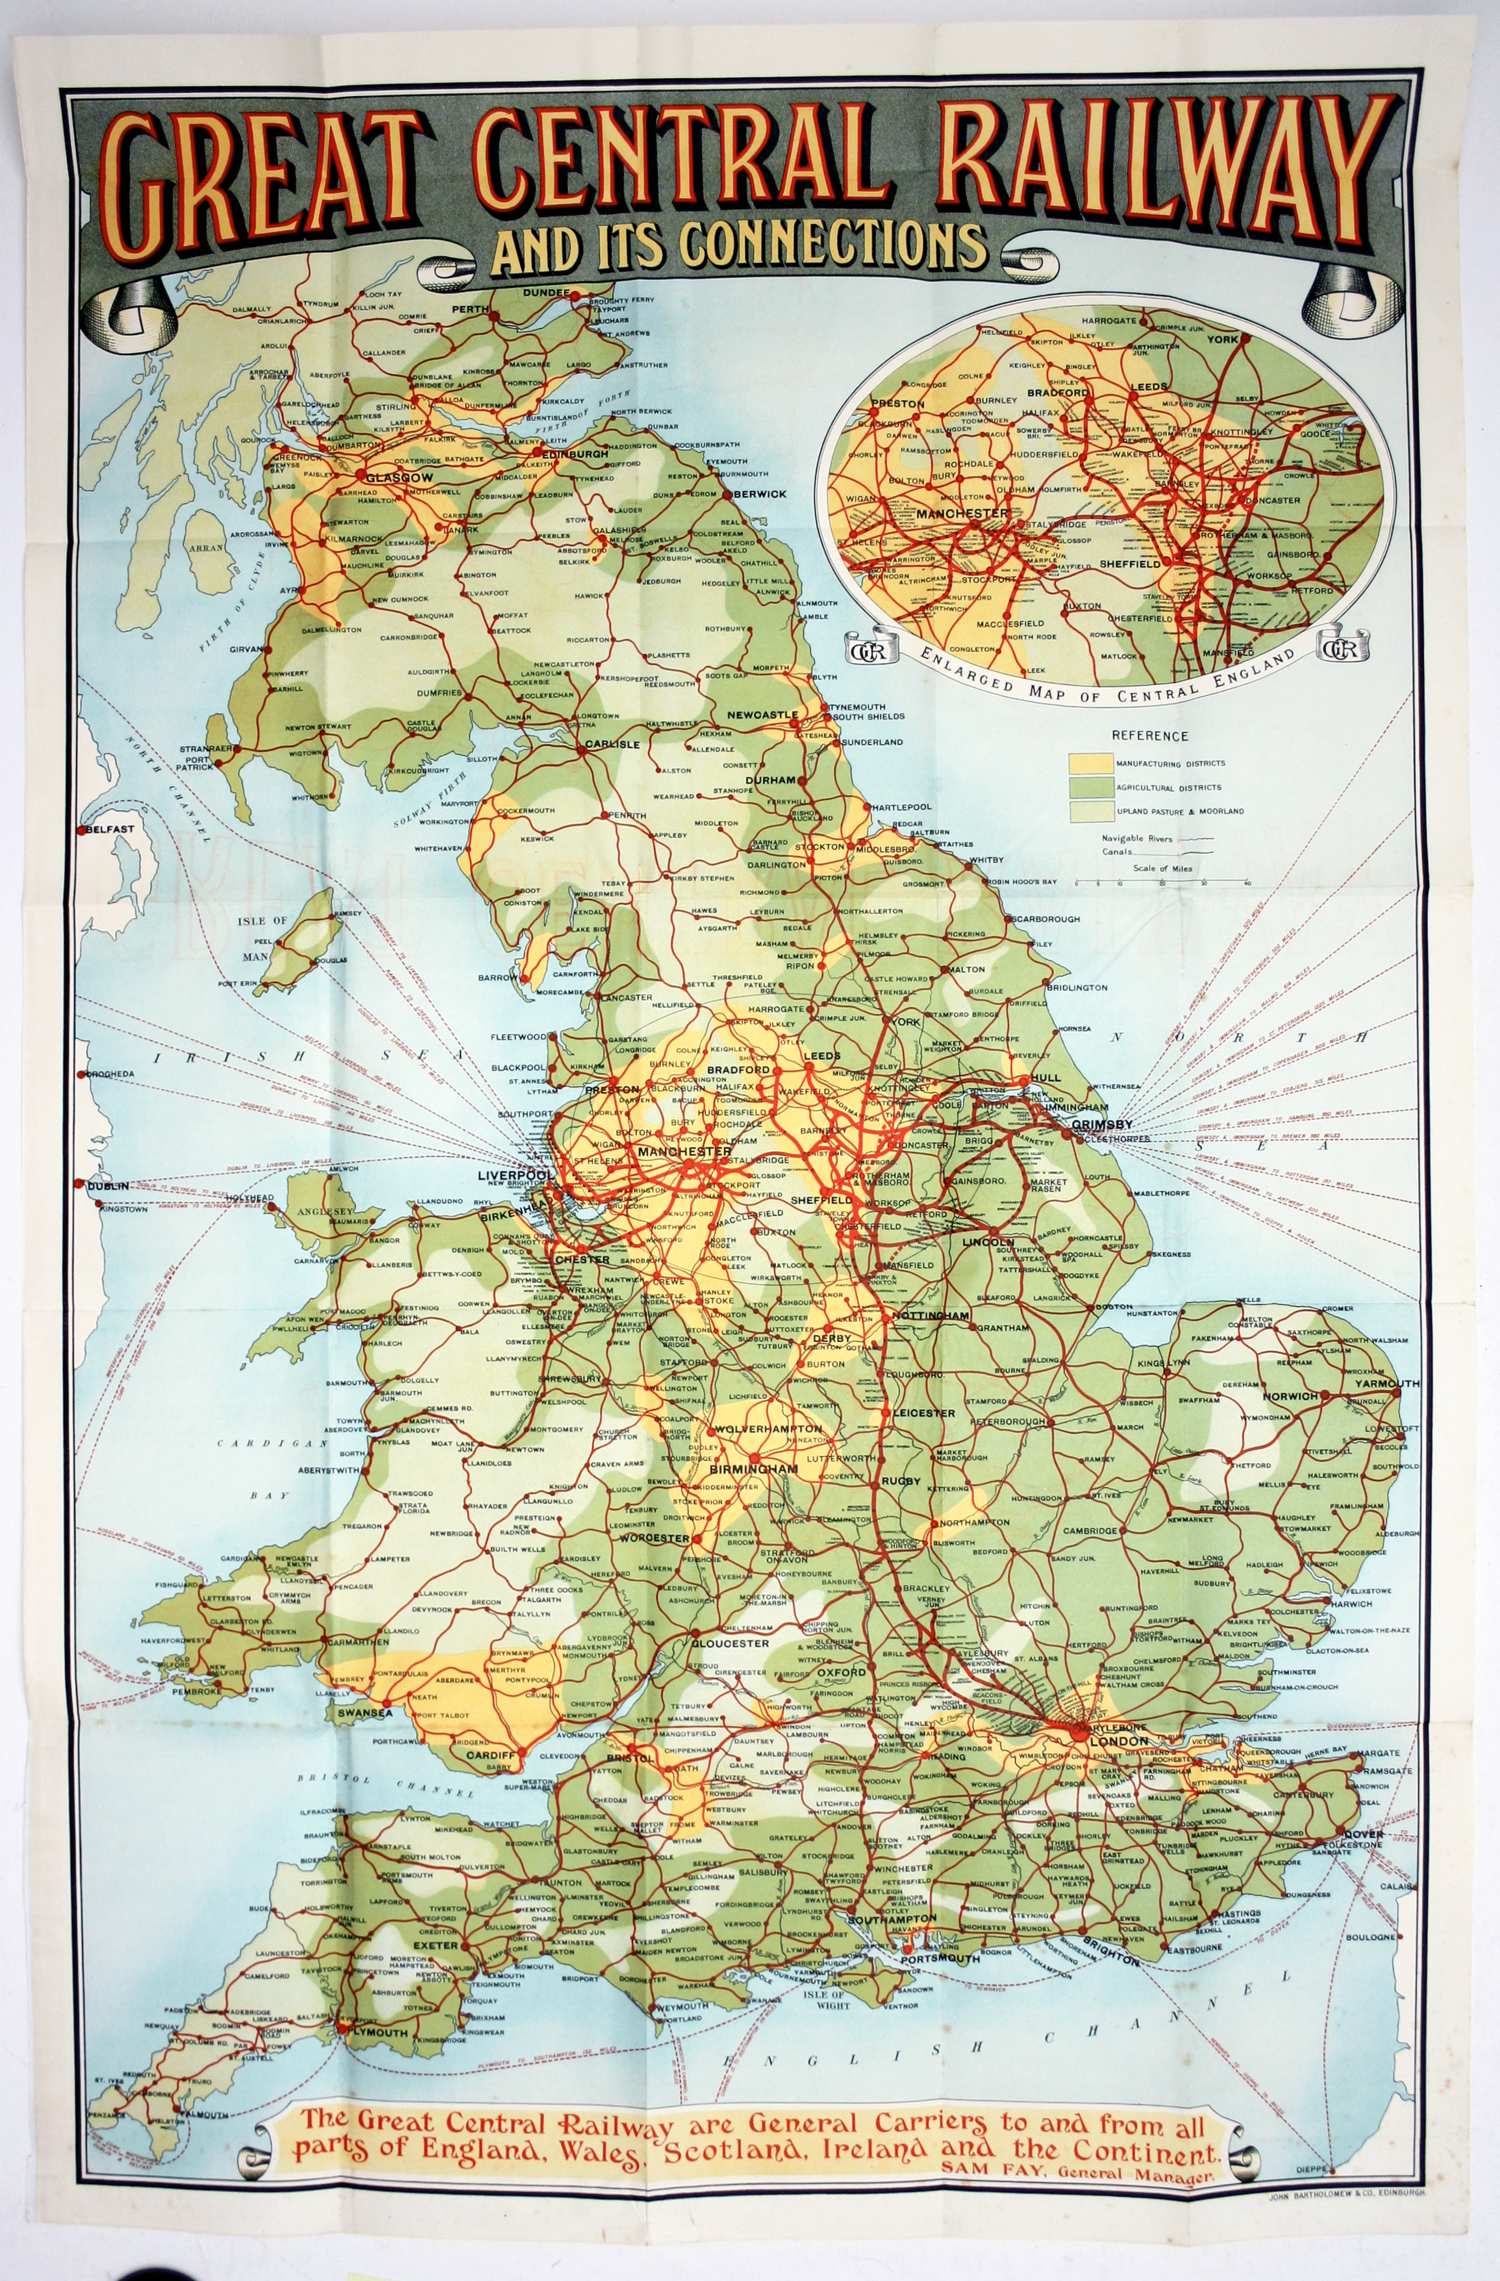 A map for the Great Central Railway and connecting lines, showing a confusing network of lines all over Great Britain.